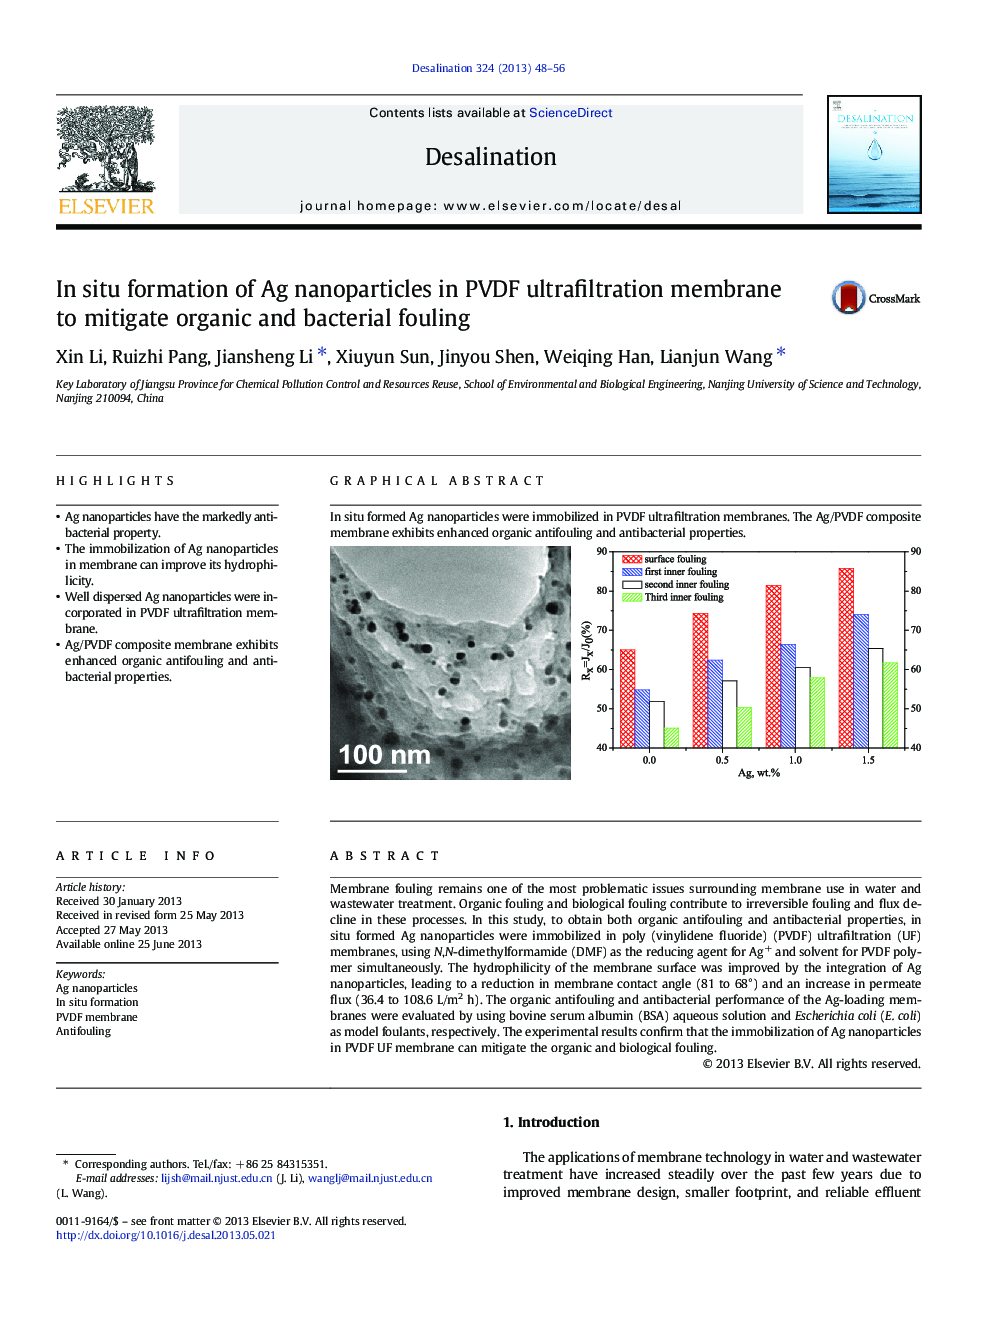 In situ formation of Ag nanoparticles in PVDF ultrafiltration membrane to mitigate organic and bacterial fouling